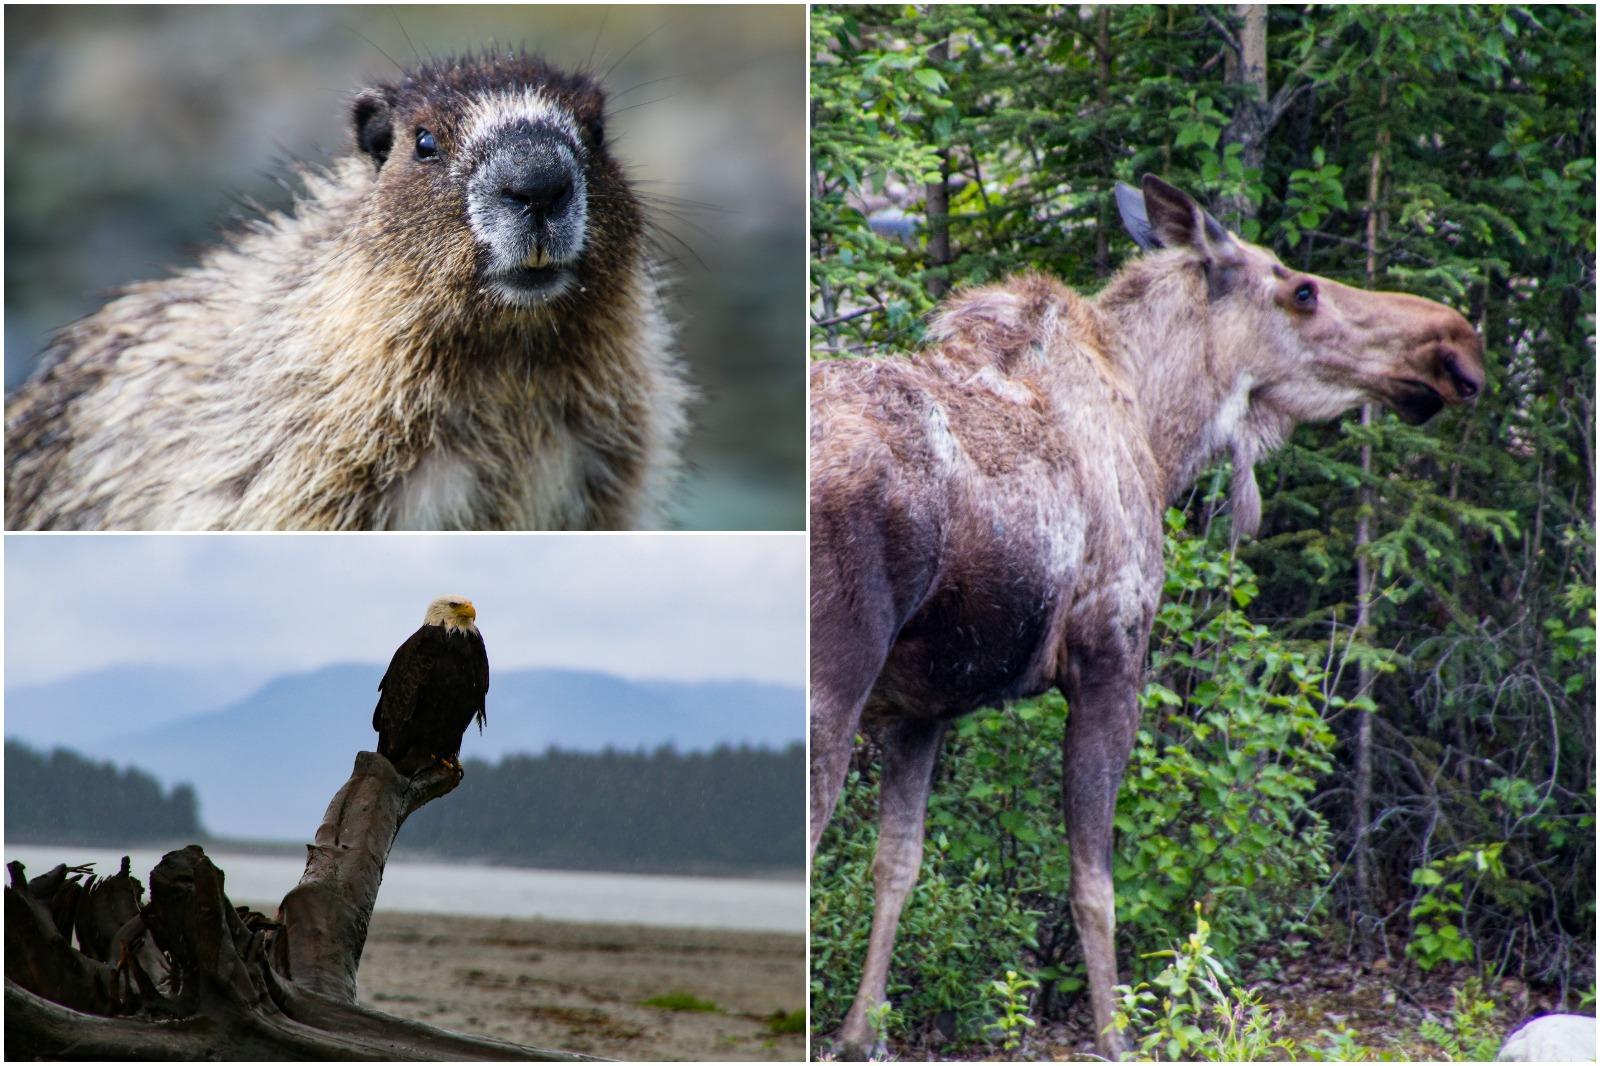 Wildlife seen during an Alaska float plane tour, including a marmot, eagle, and moose.